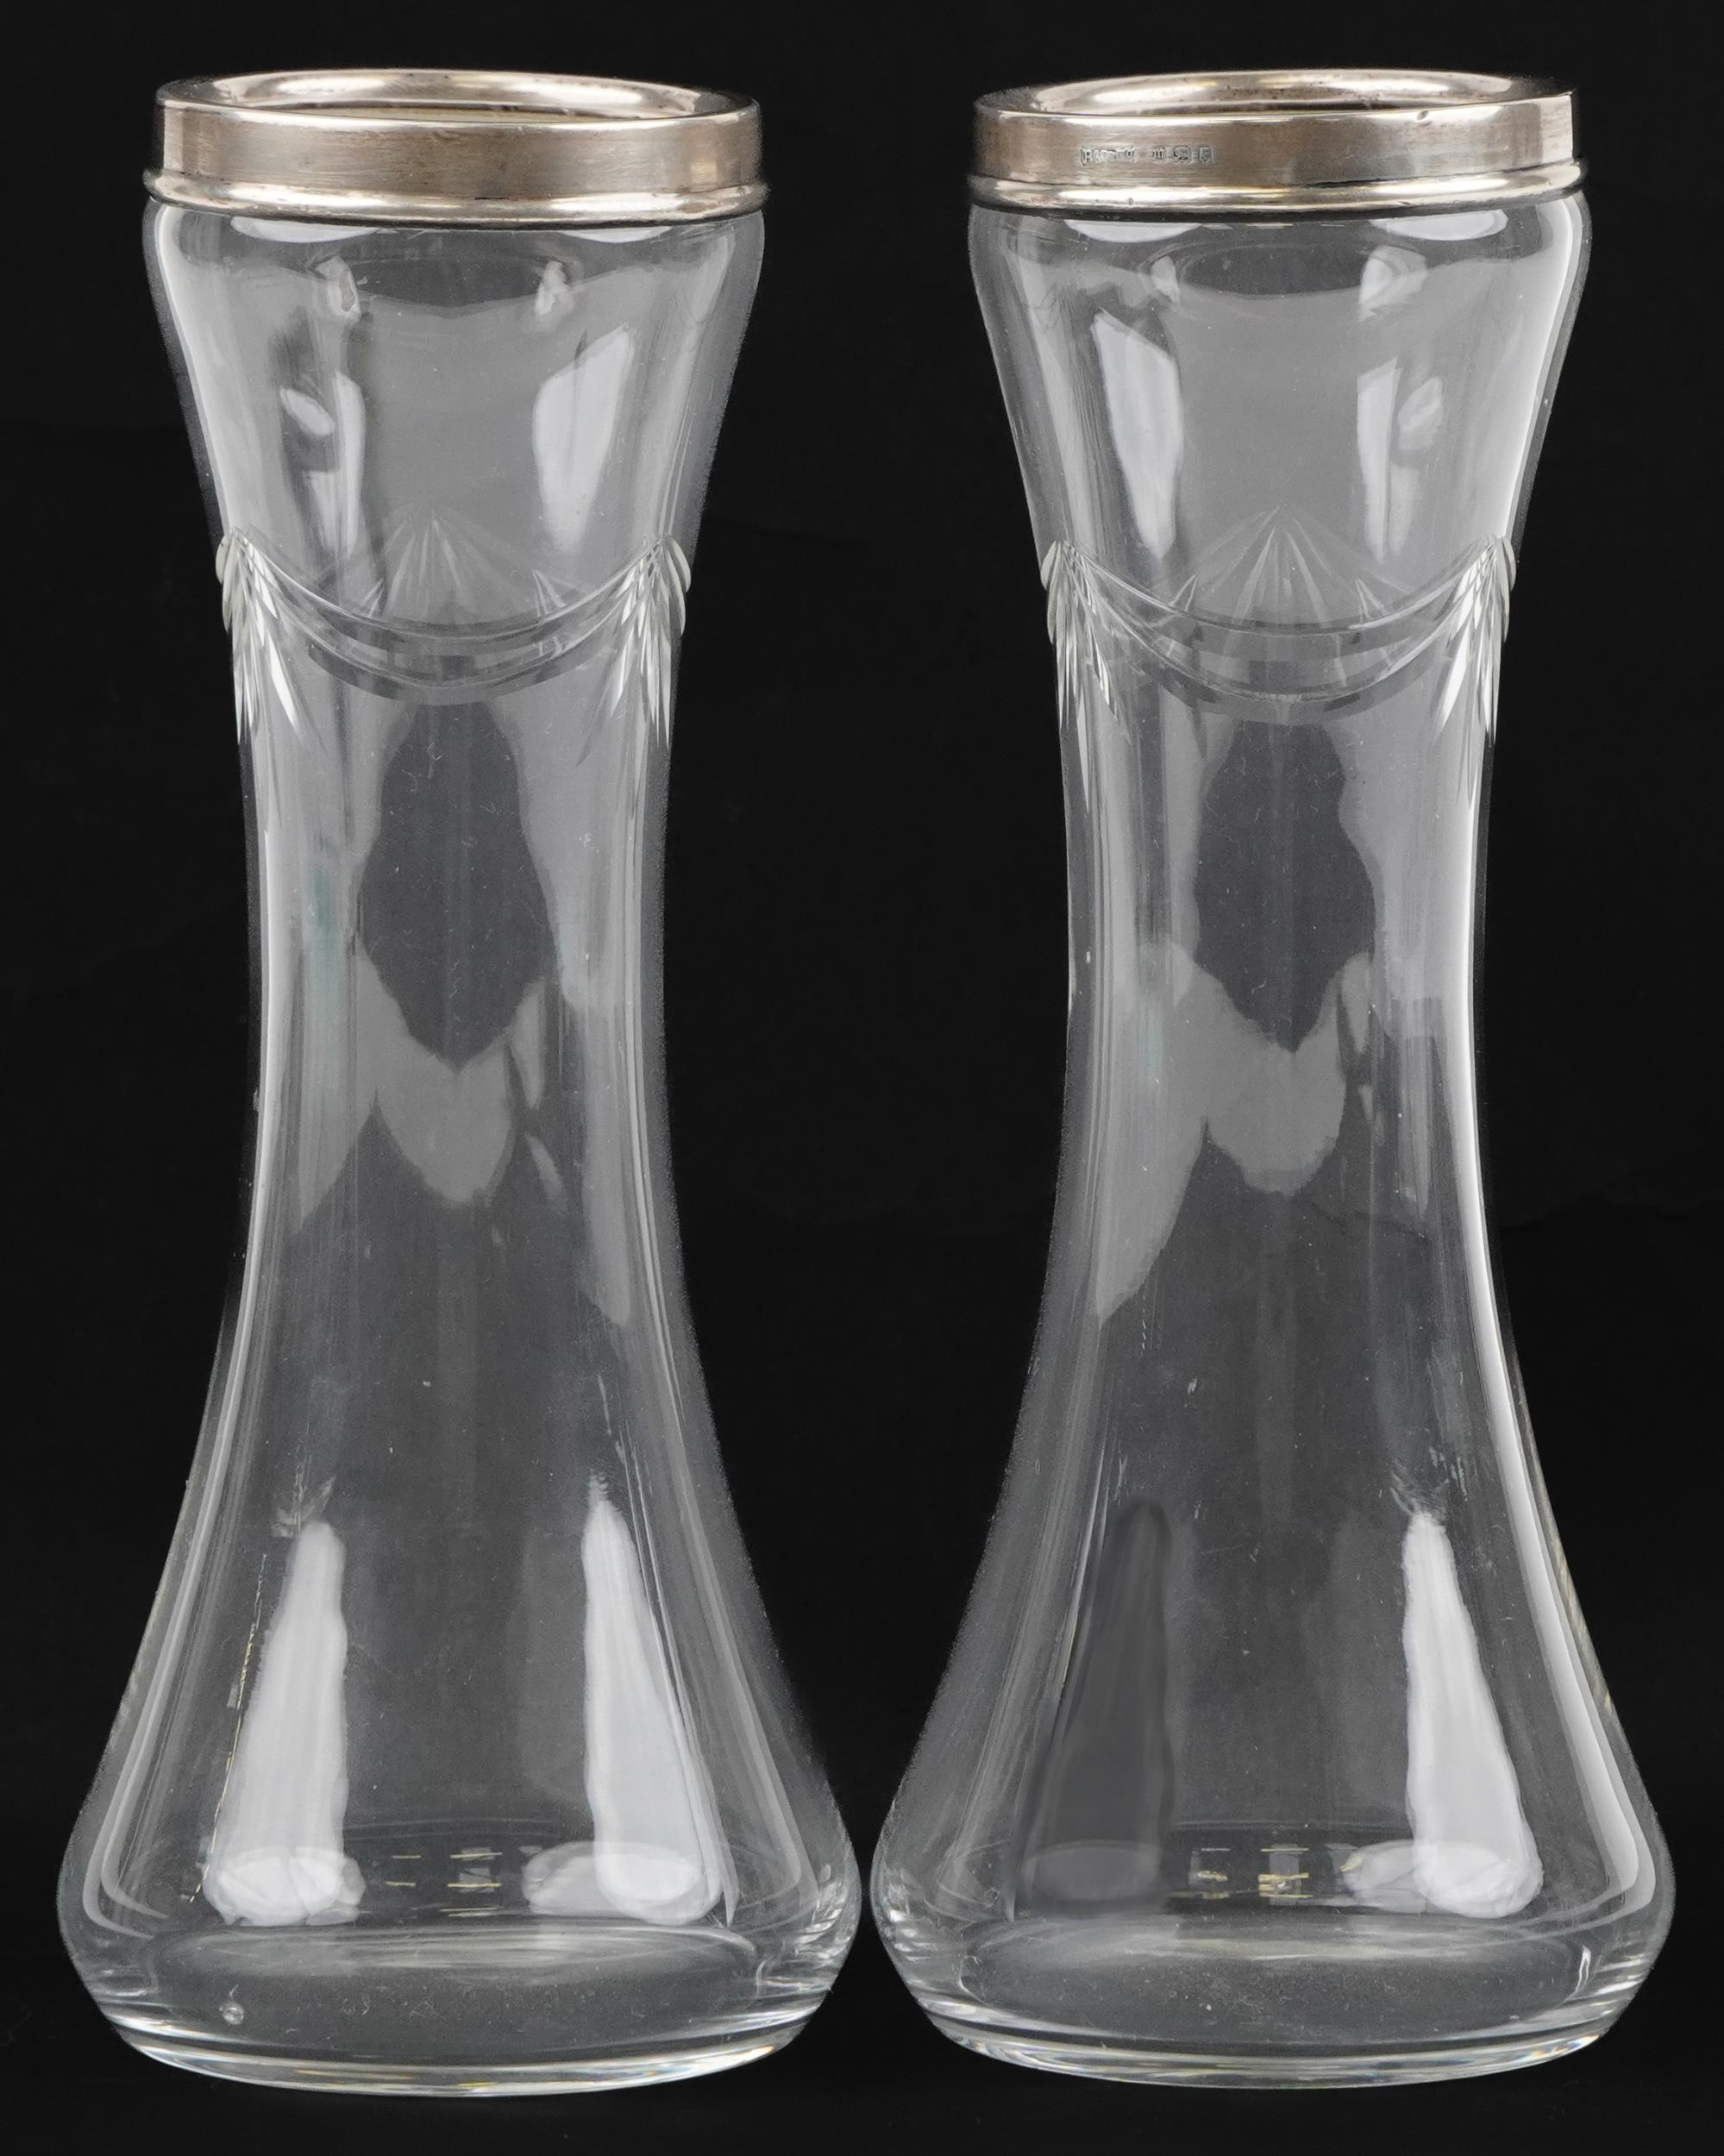 Pair of George V etched glass vases with silver collars, B M & Co maker's mark, London 1927, 20. - Image 2 of 6